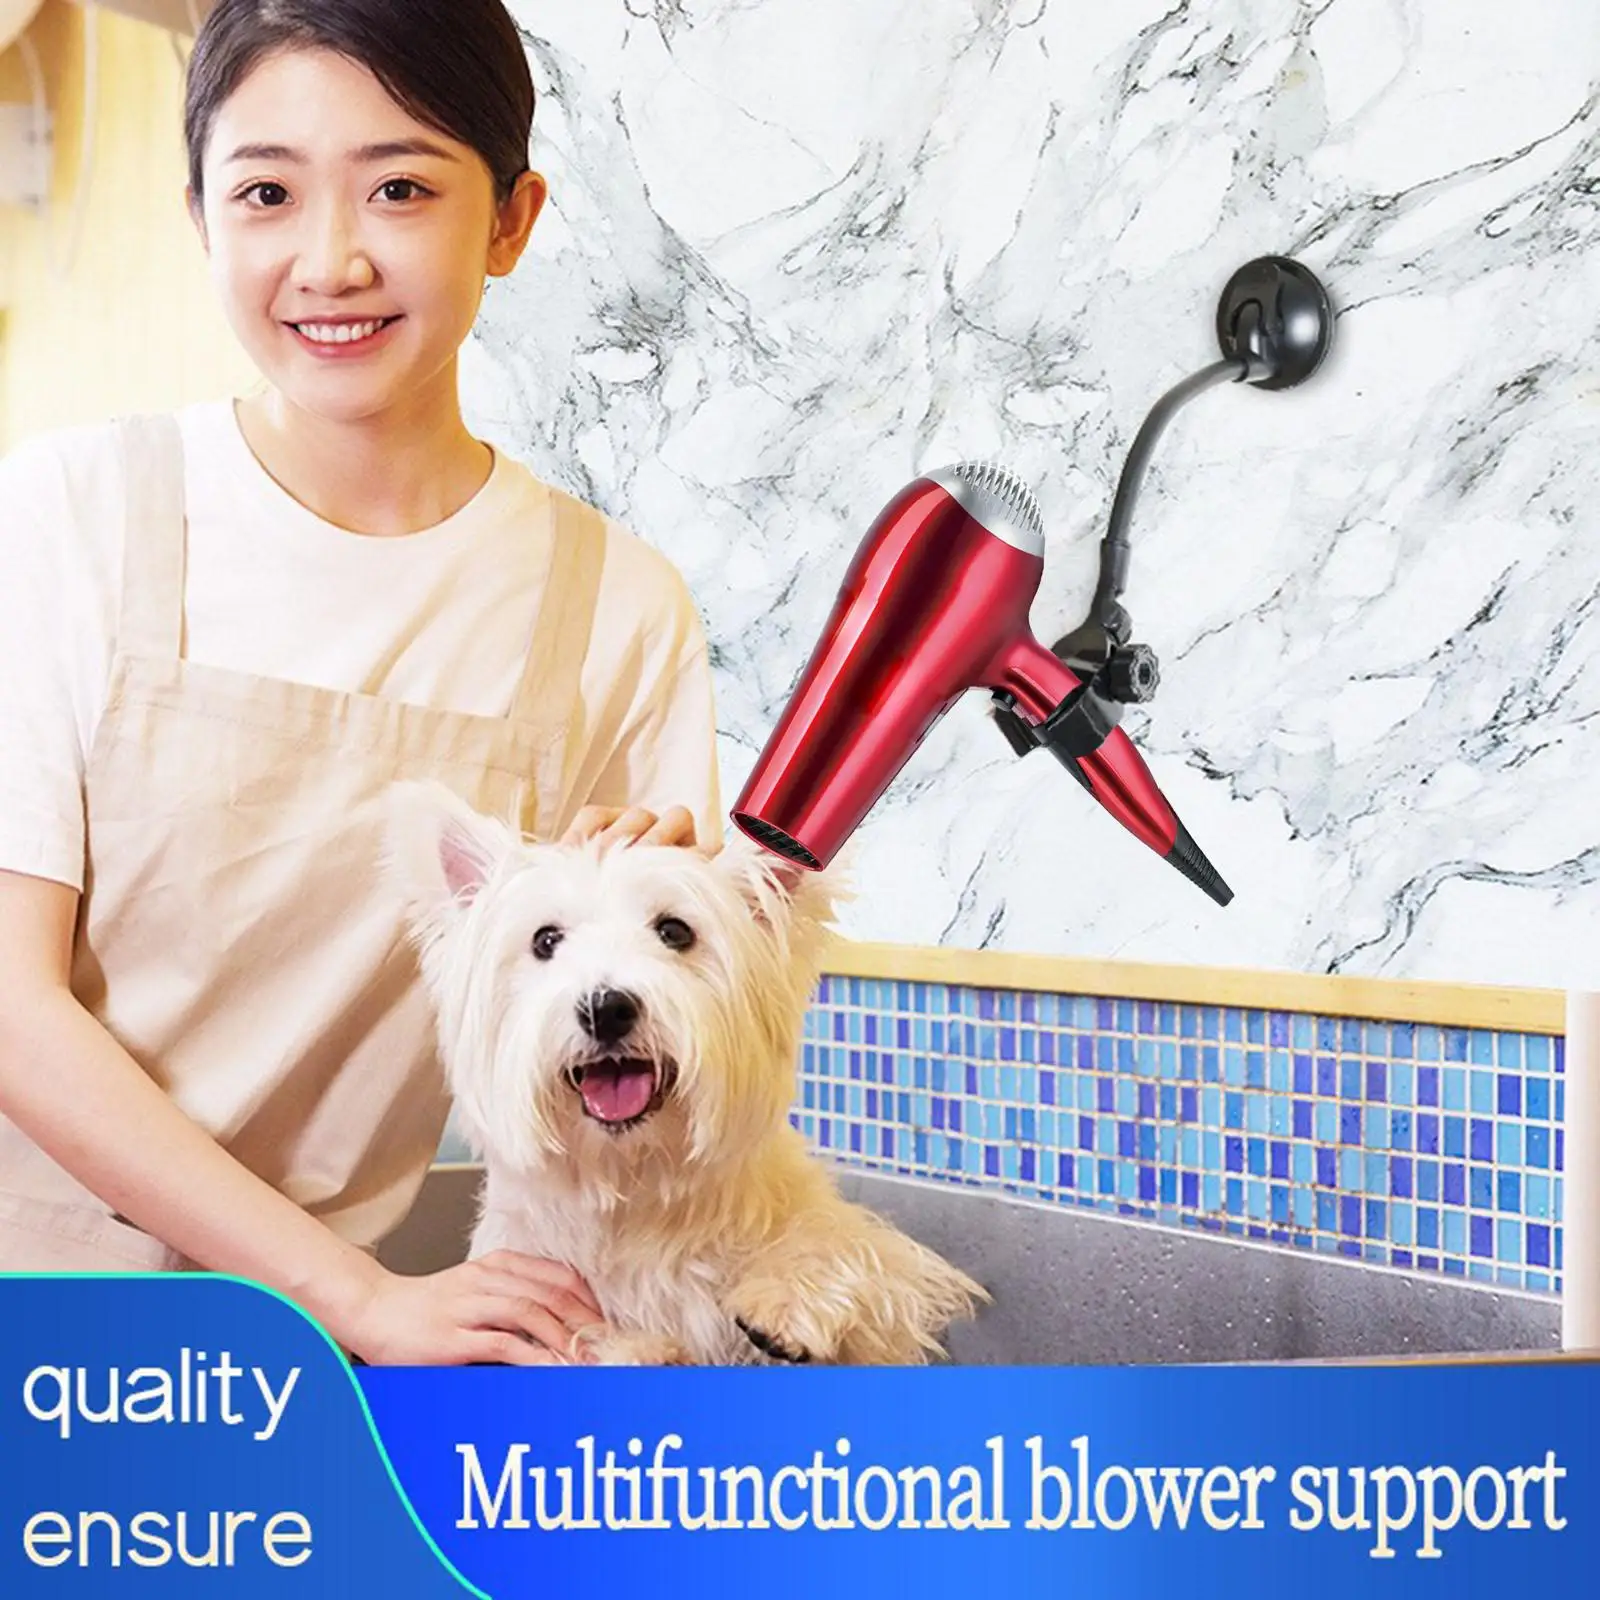 Blow Dryer Stand Suction Cup Hair Dryer Holder for Hairdryer